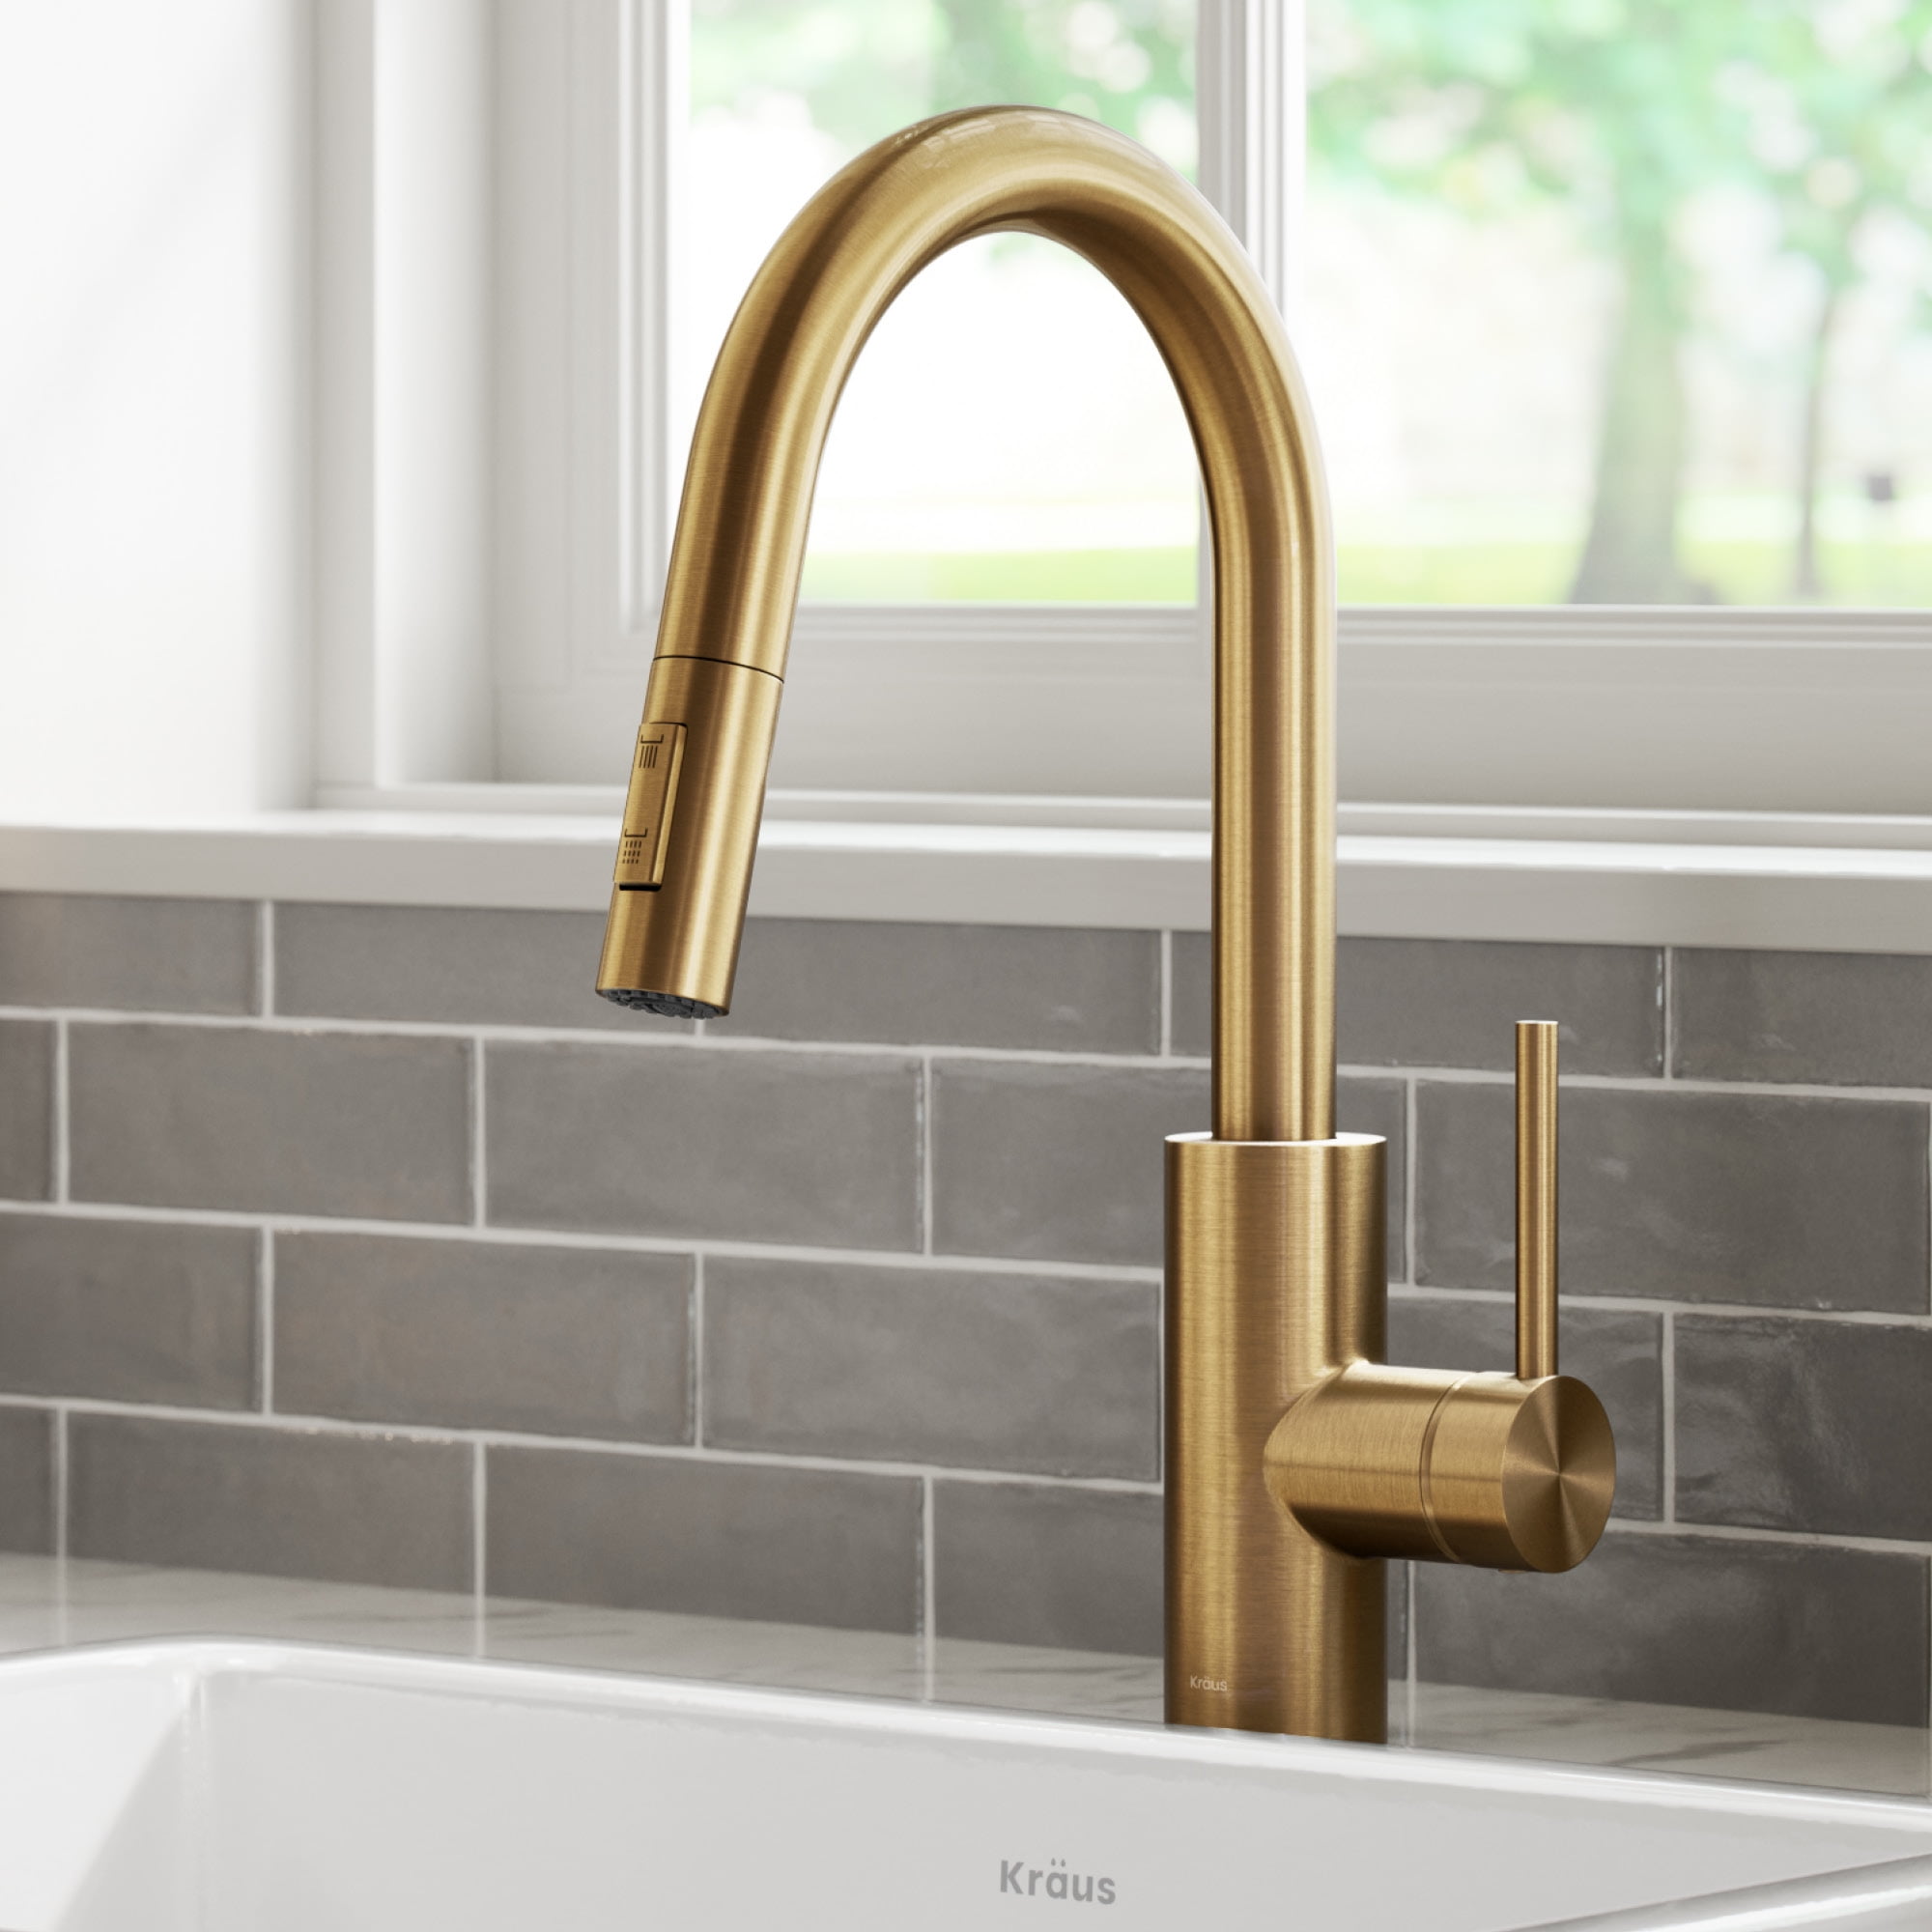 Small Single Handle Brushed Nickel Lavatory/Bathroom/Kitchen Faucet Brass Body 